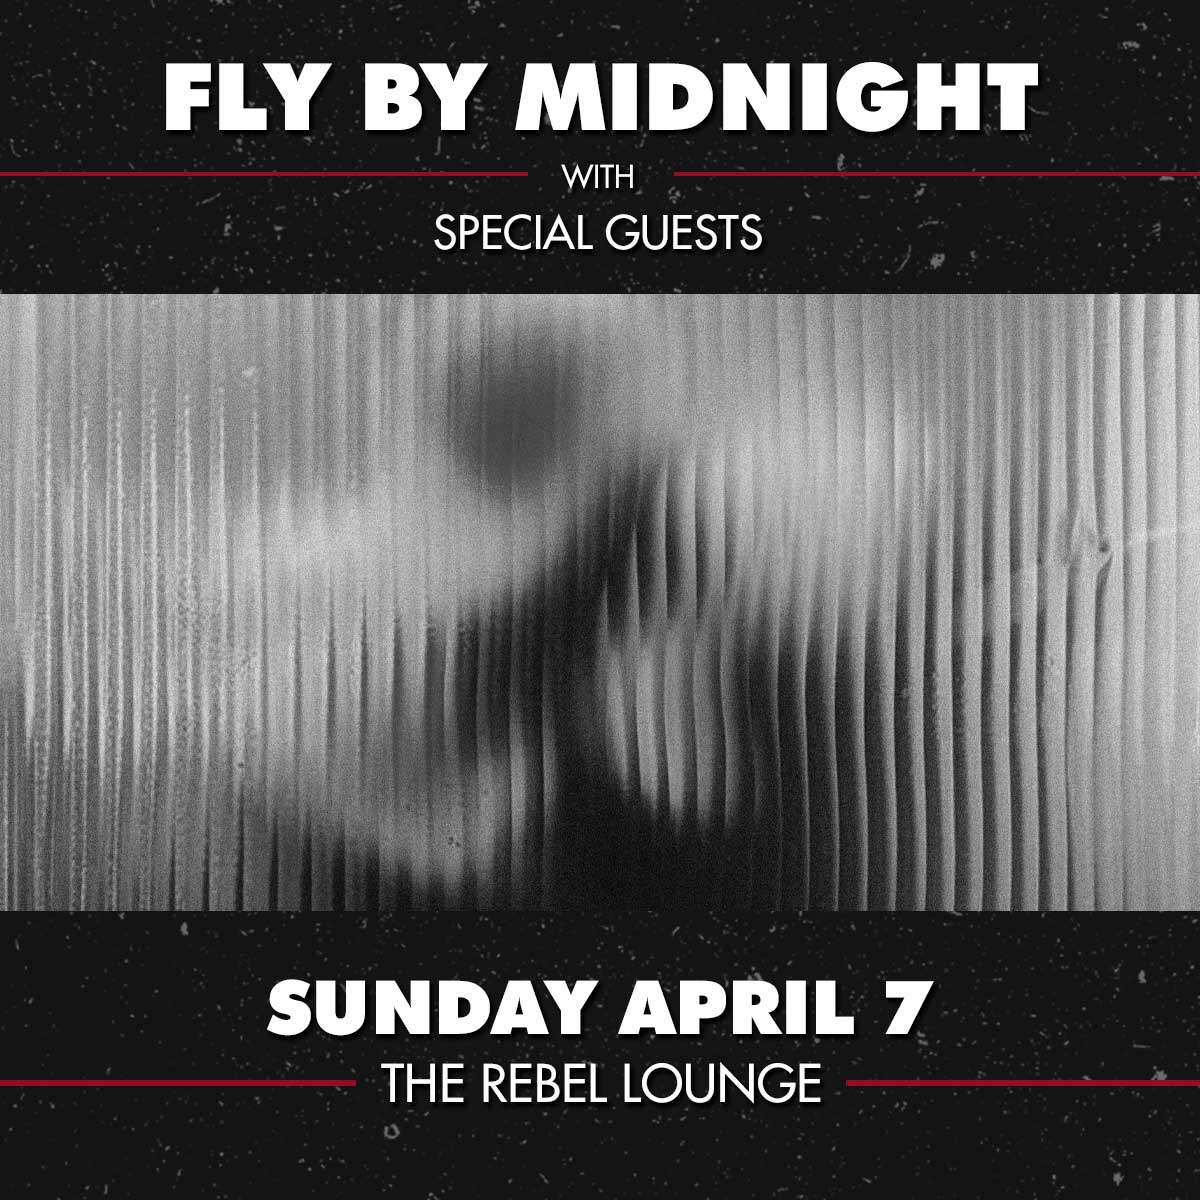 FLY BY MIDNIGHT